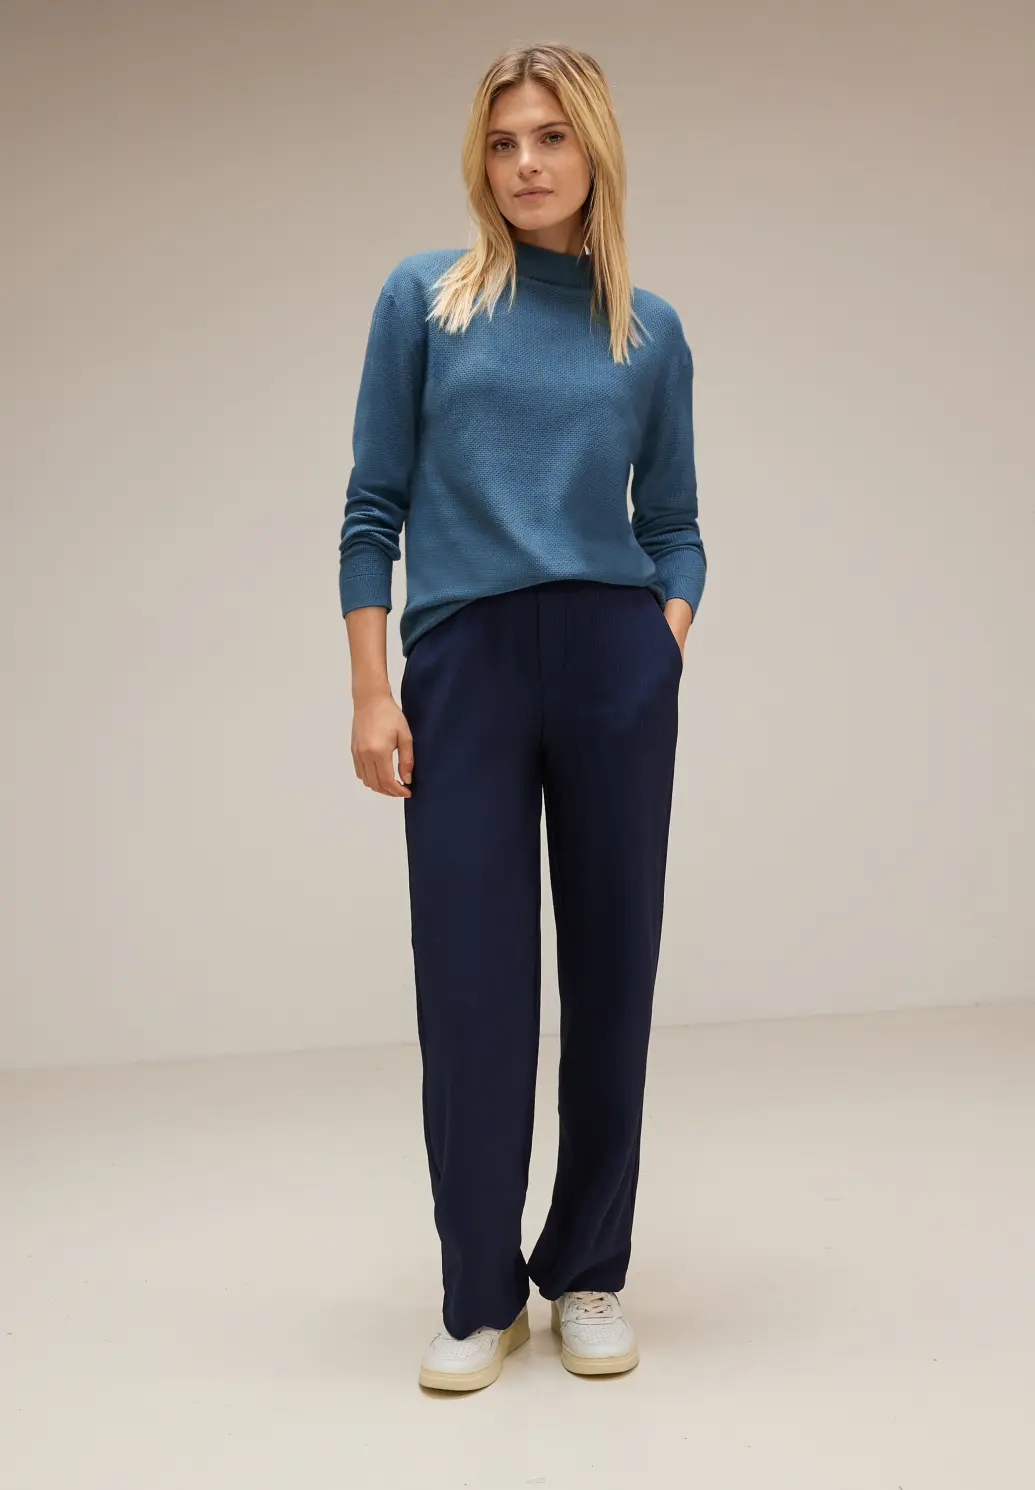 One | - Cotton - Blues Knit Satin Blue Melange with Structure Street Jumper